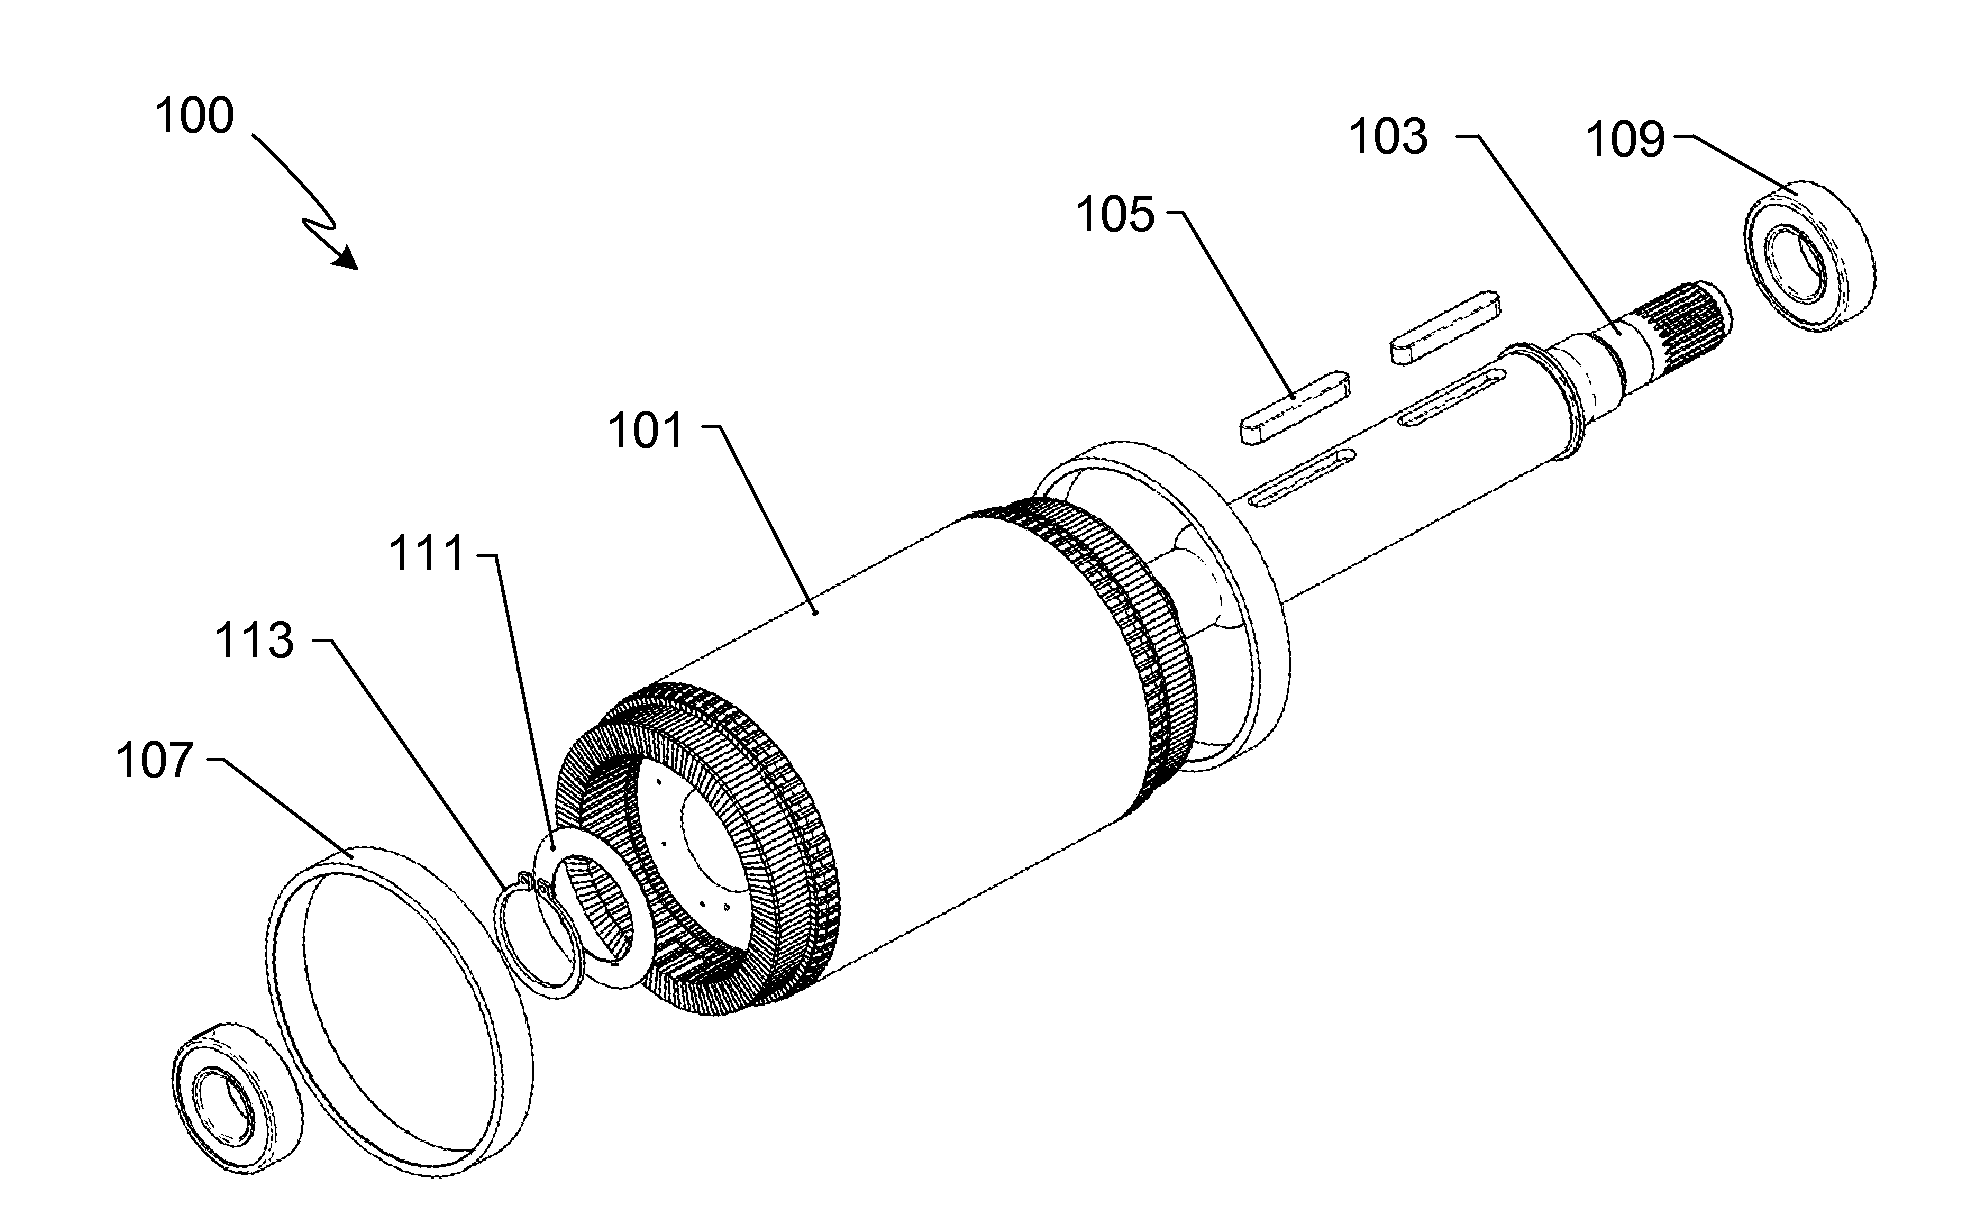 Rotor Design for an Electric Motor